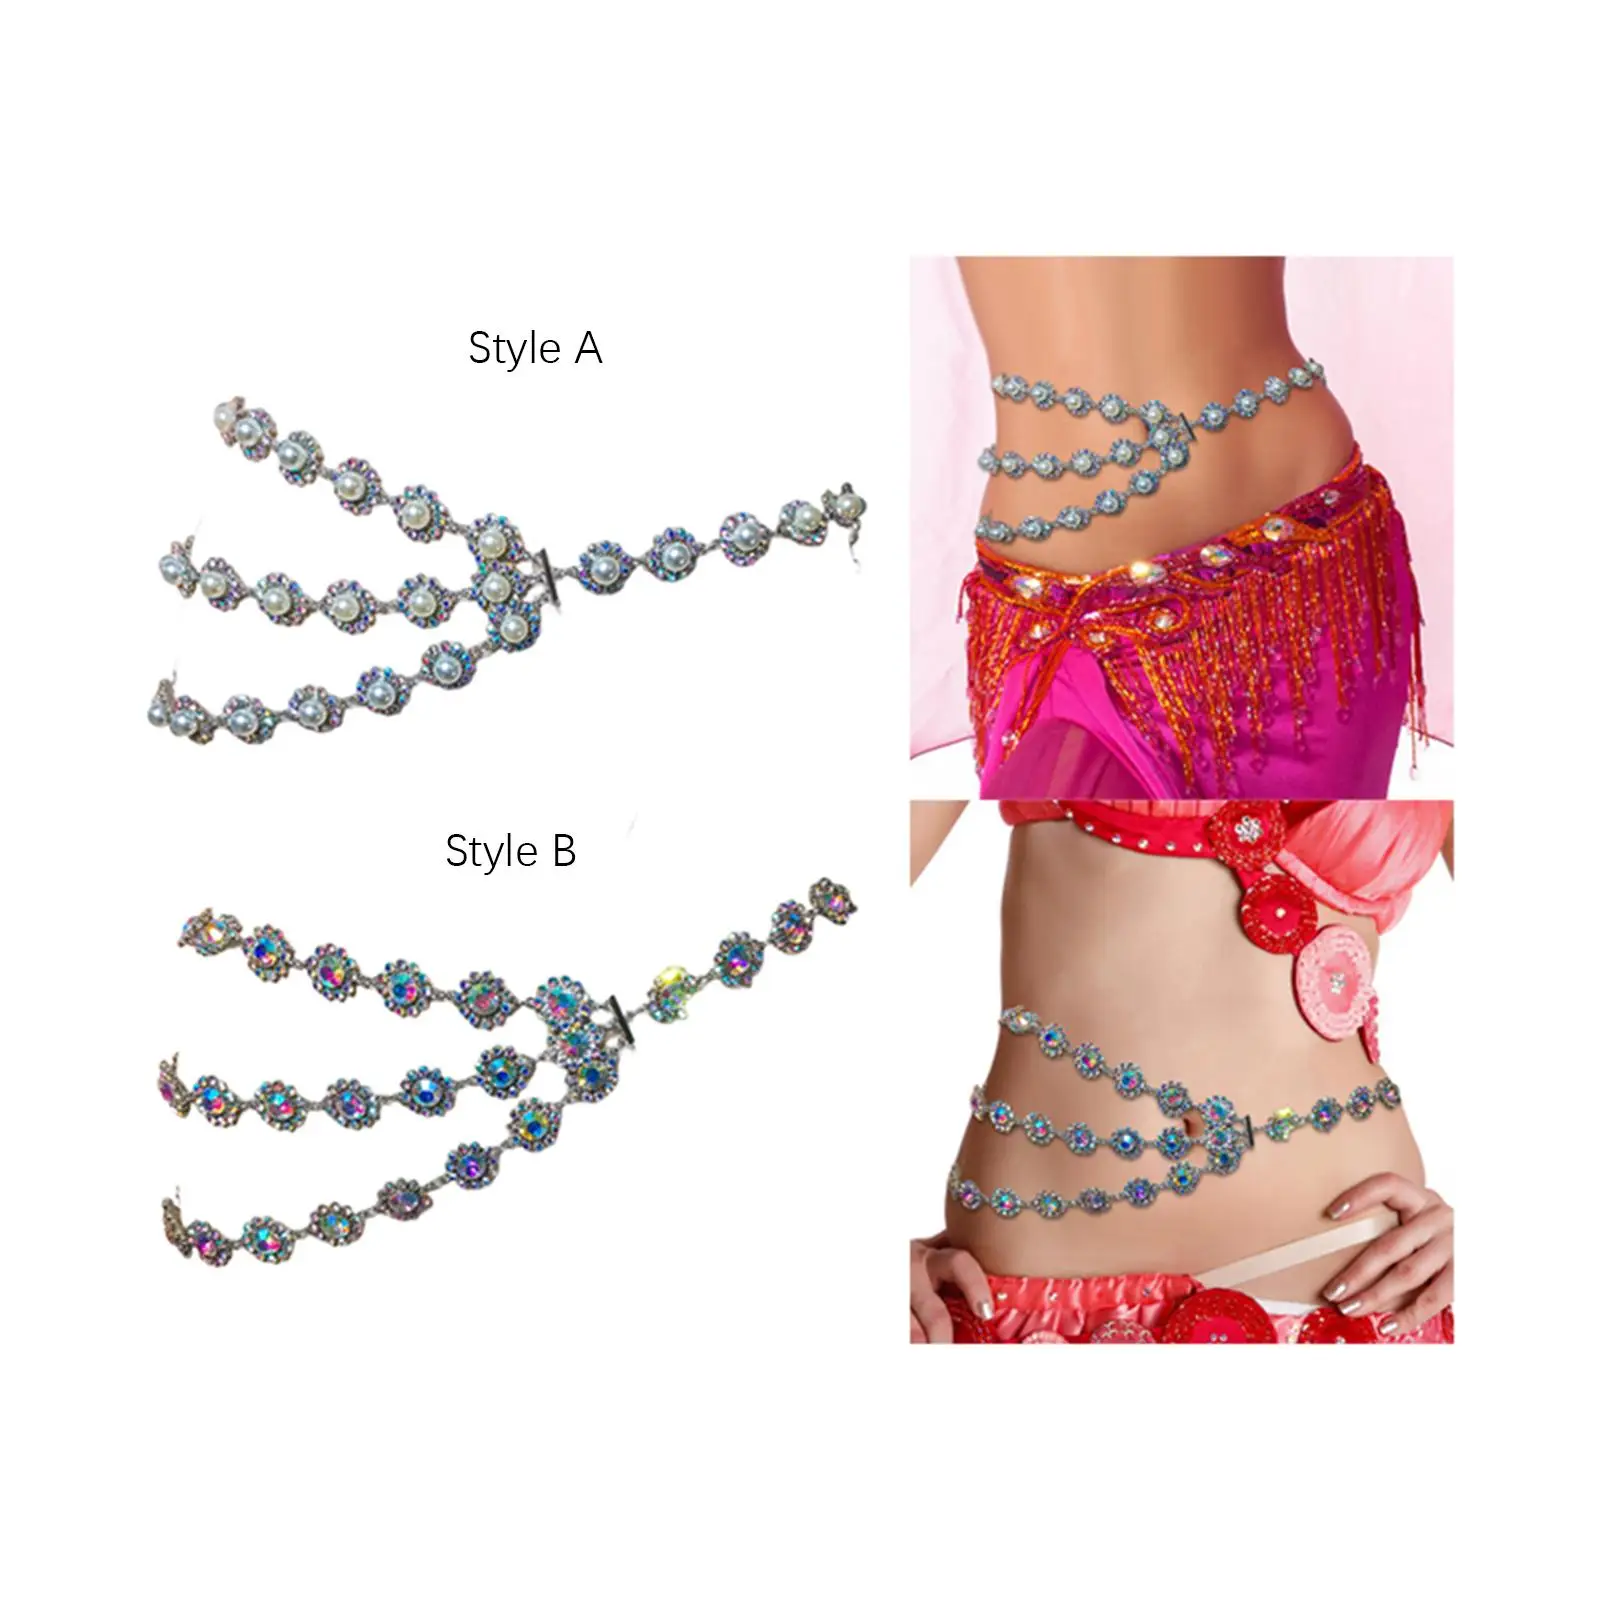 Waist Chain Belt Outfit Accessories Belly Chains for Bikinis Dress Party